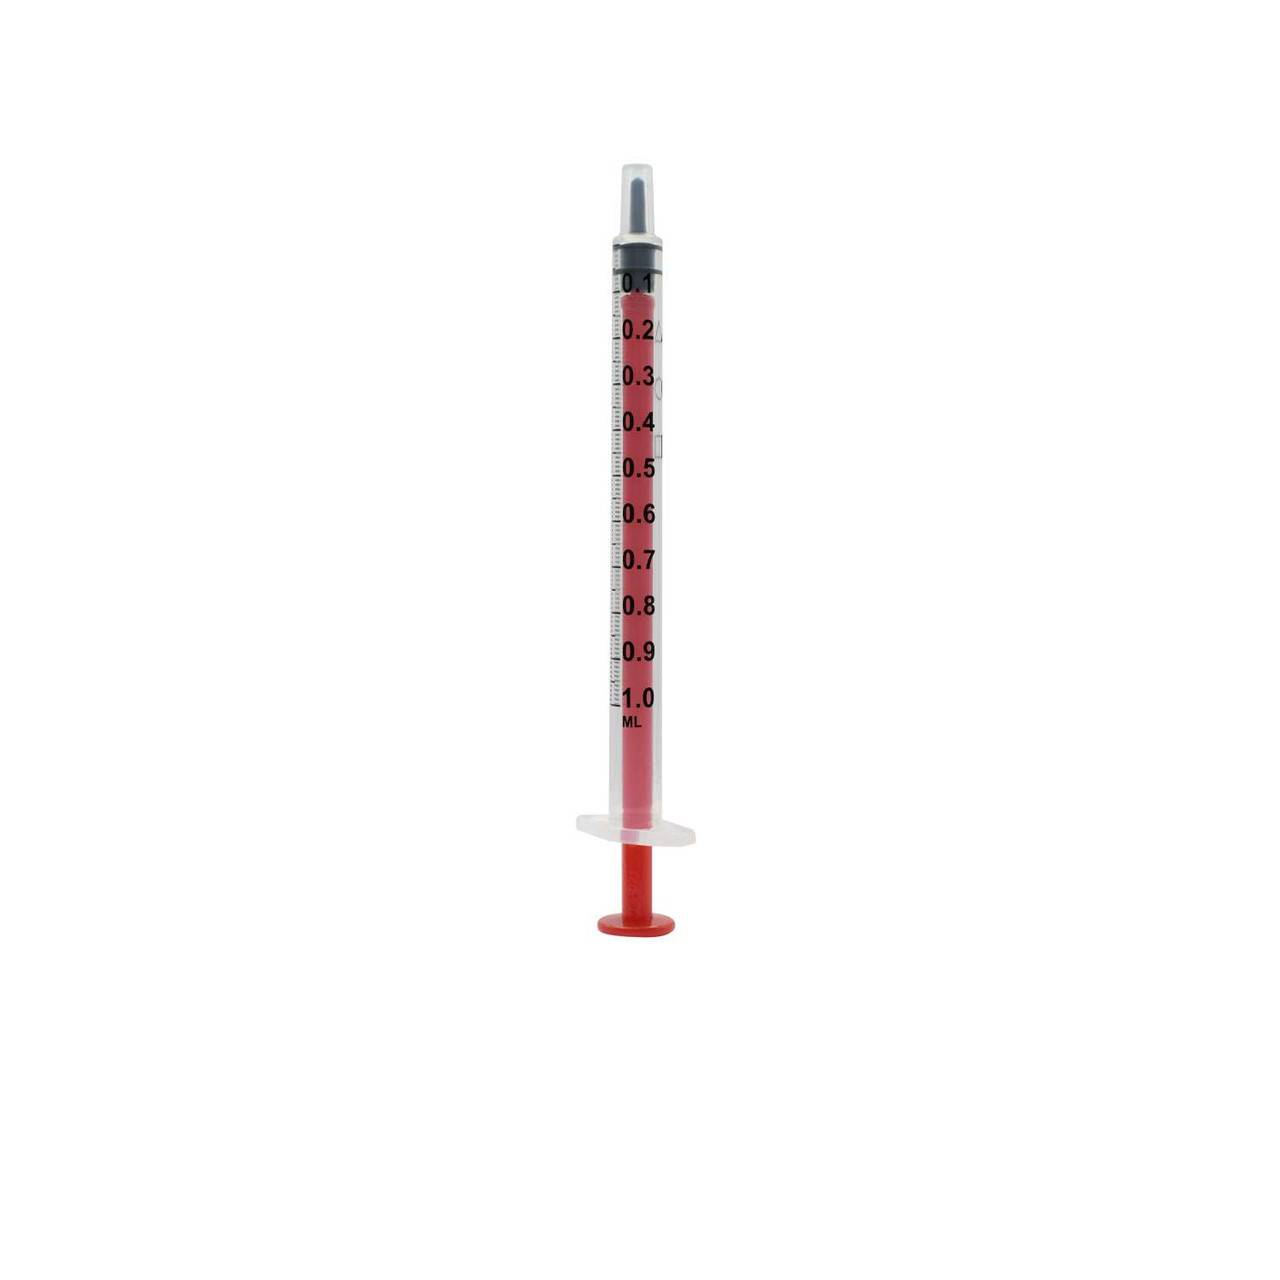 1ml Acuject Low Dead Space Syringes Red - UKMEDI